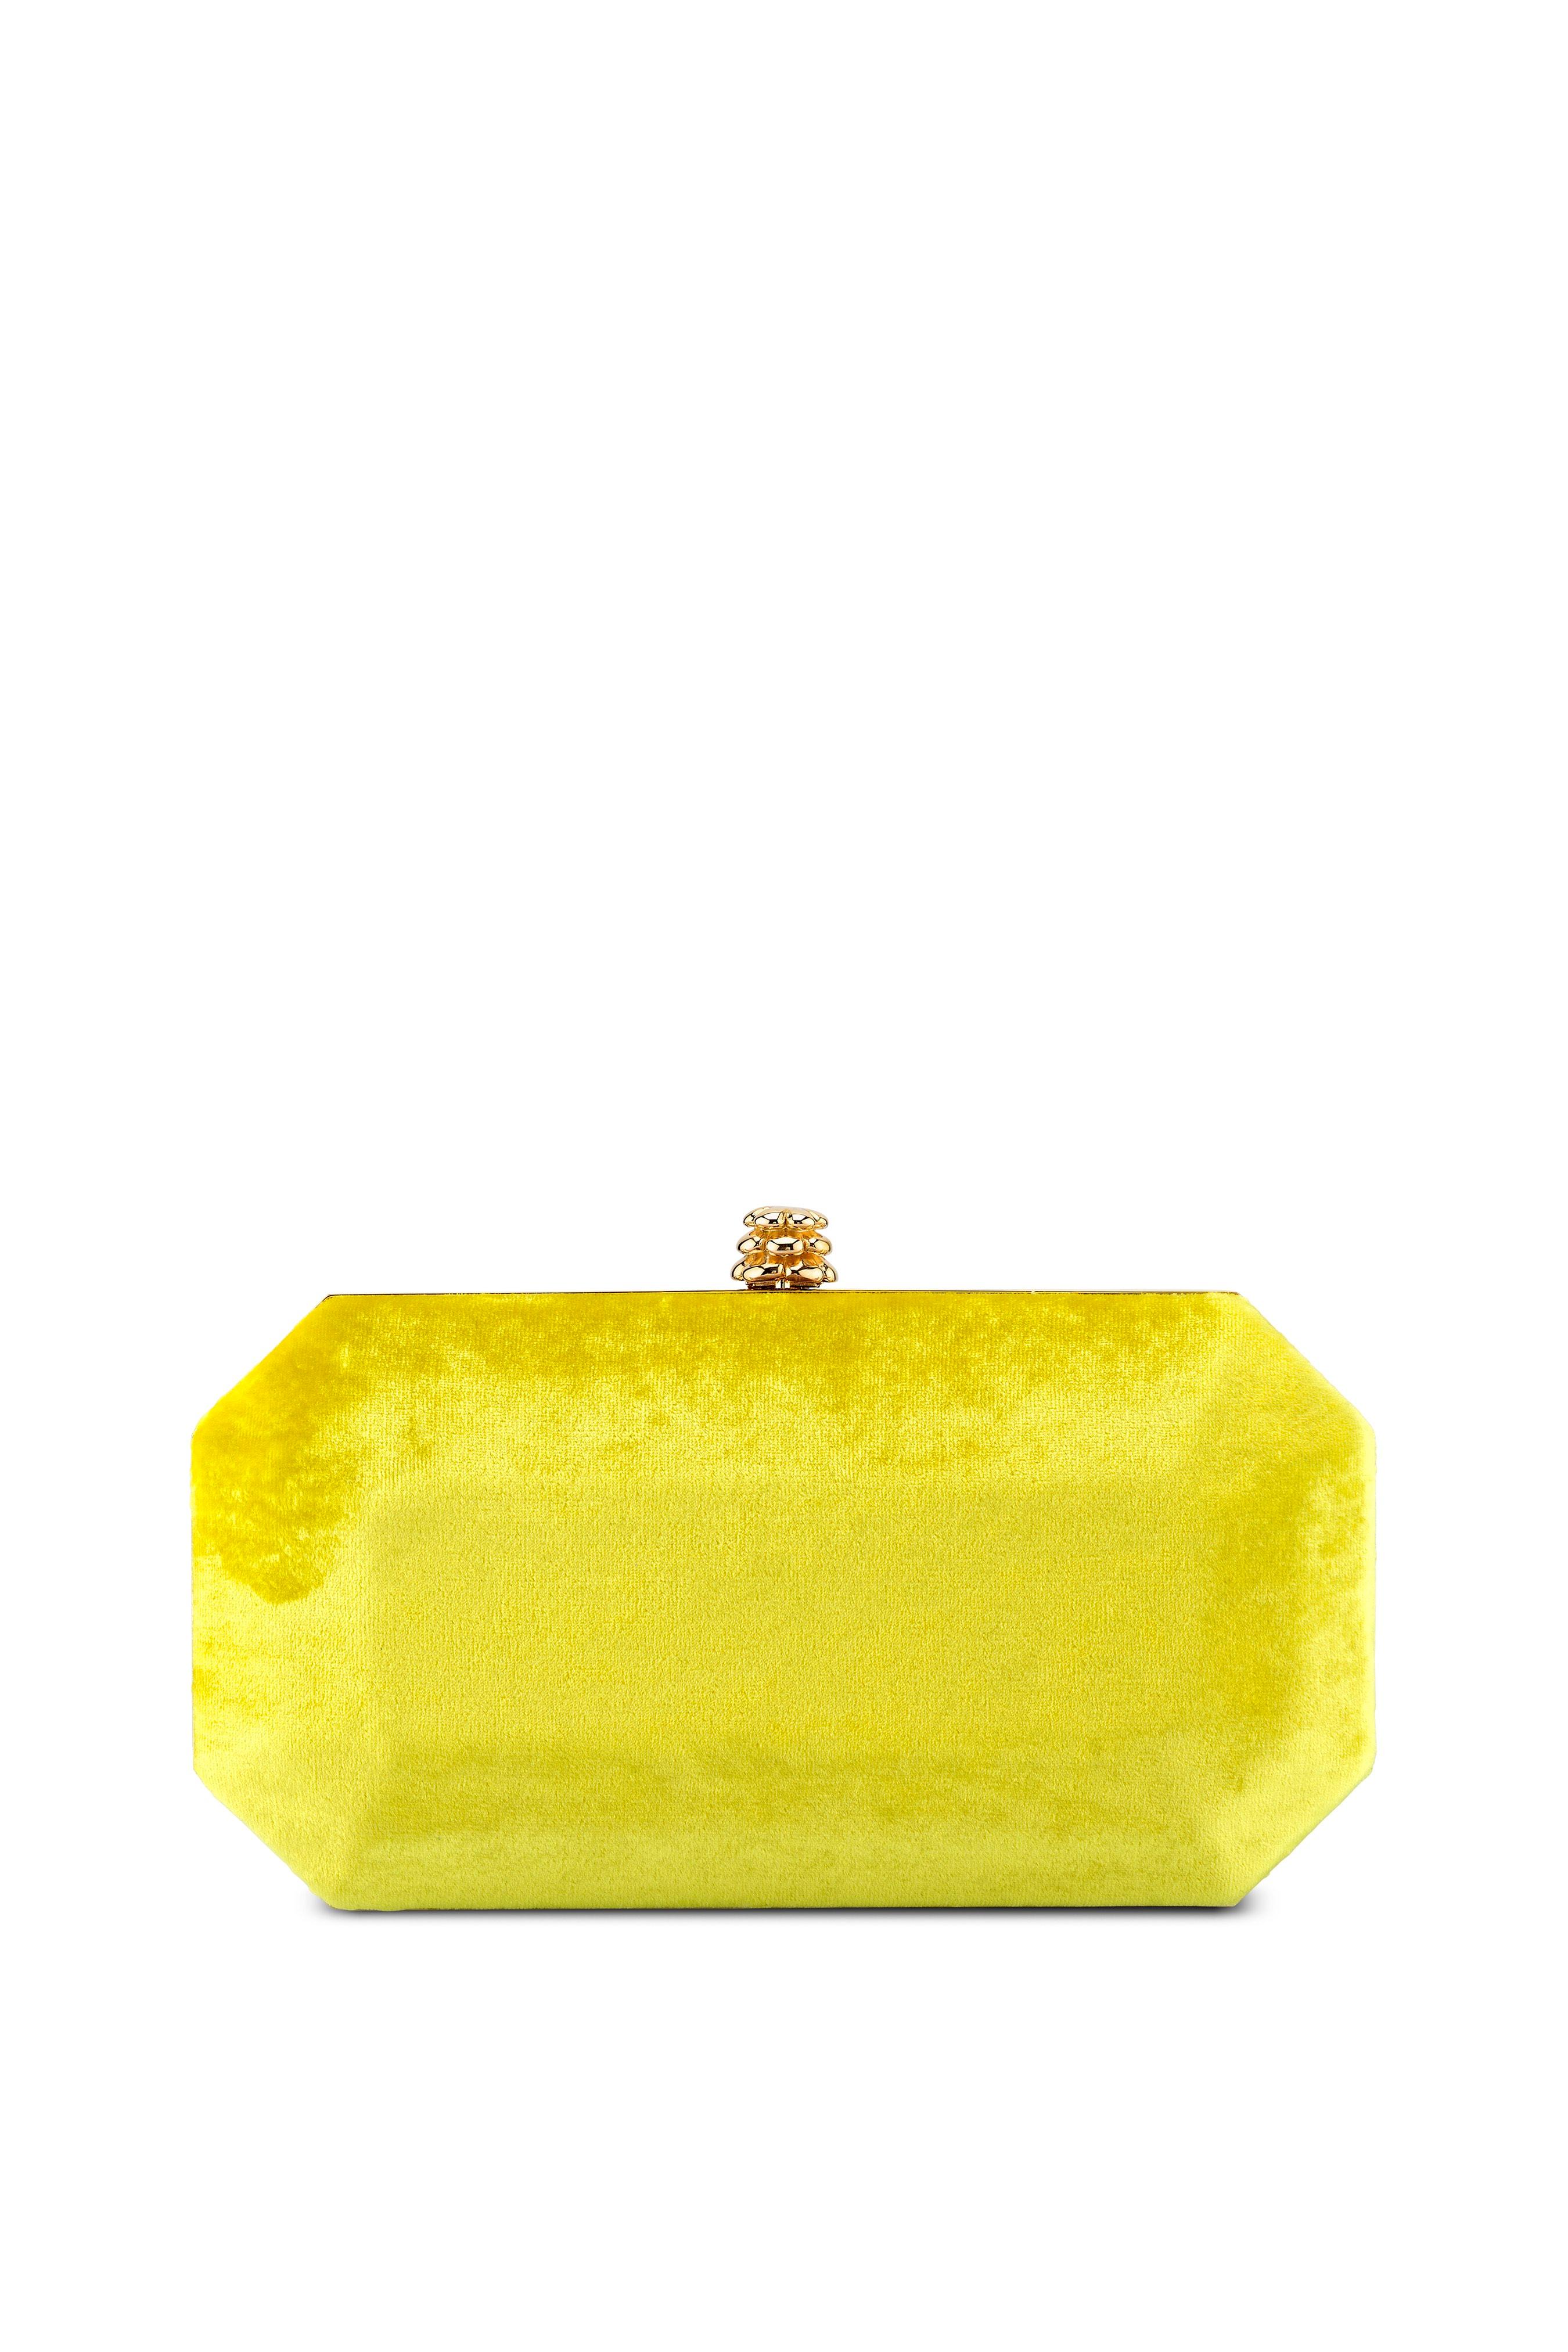 The Perry Small is featured in our Limoncello crushed velvet with gold hardware. The Perry is a hard-framed clutch designed with interior pockets and an optional gold cross-body chain. It's elegant emerald shape is inspired by Tyler's own engagement